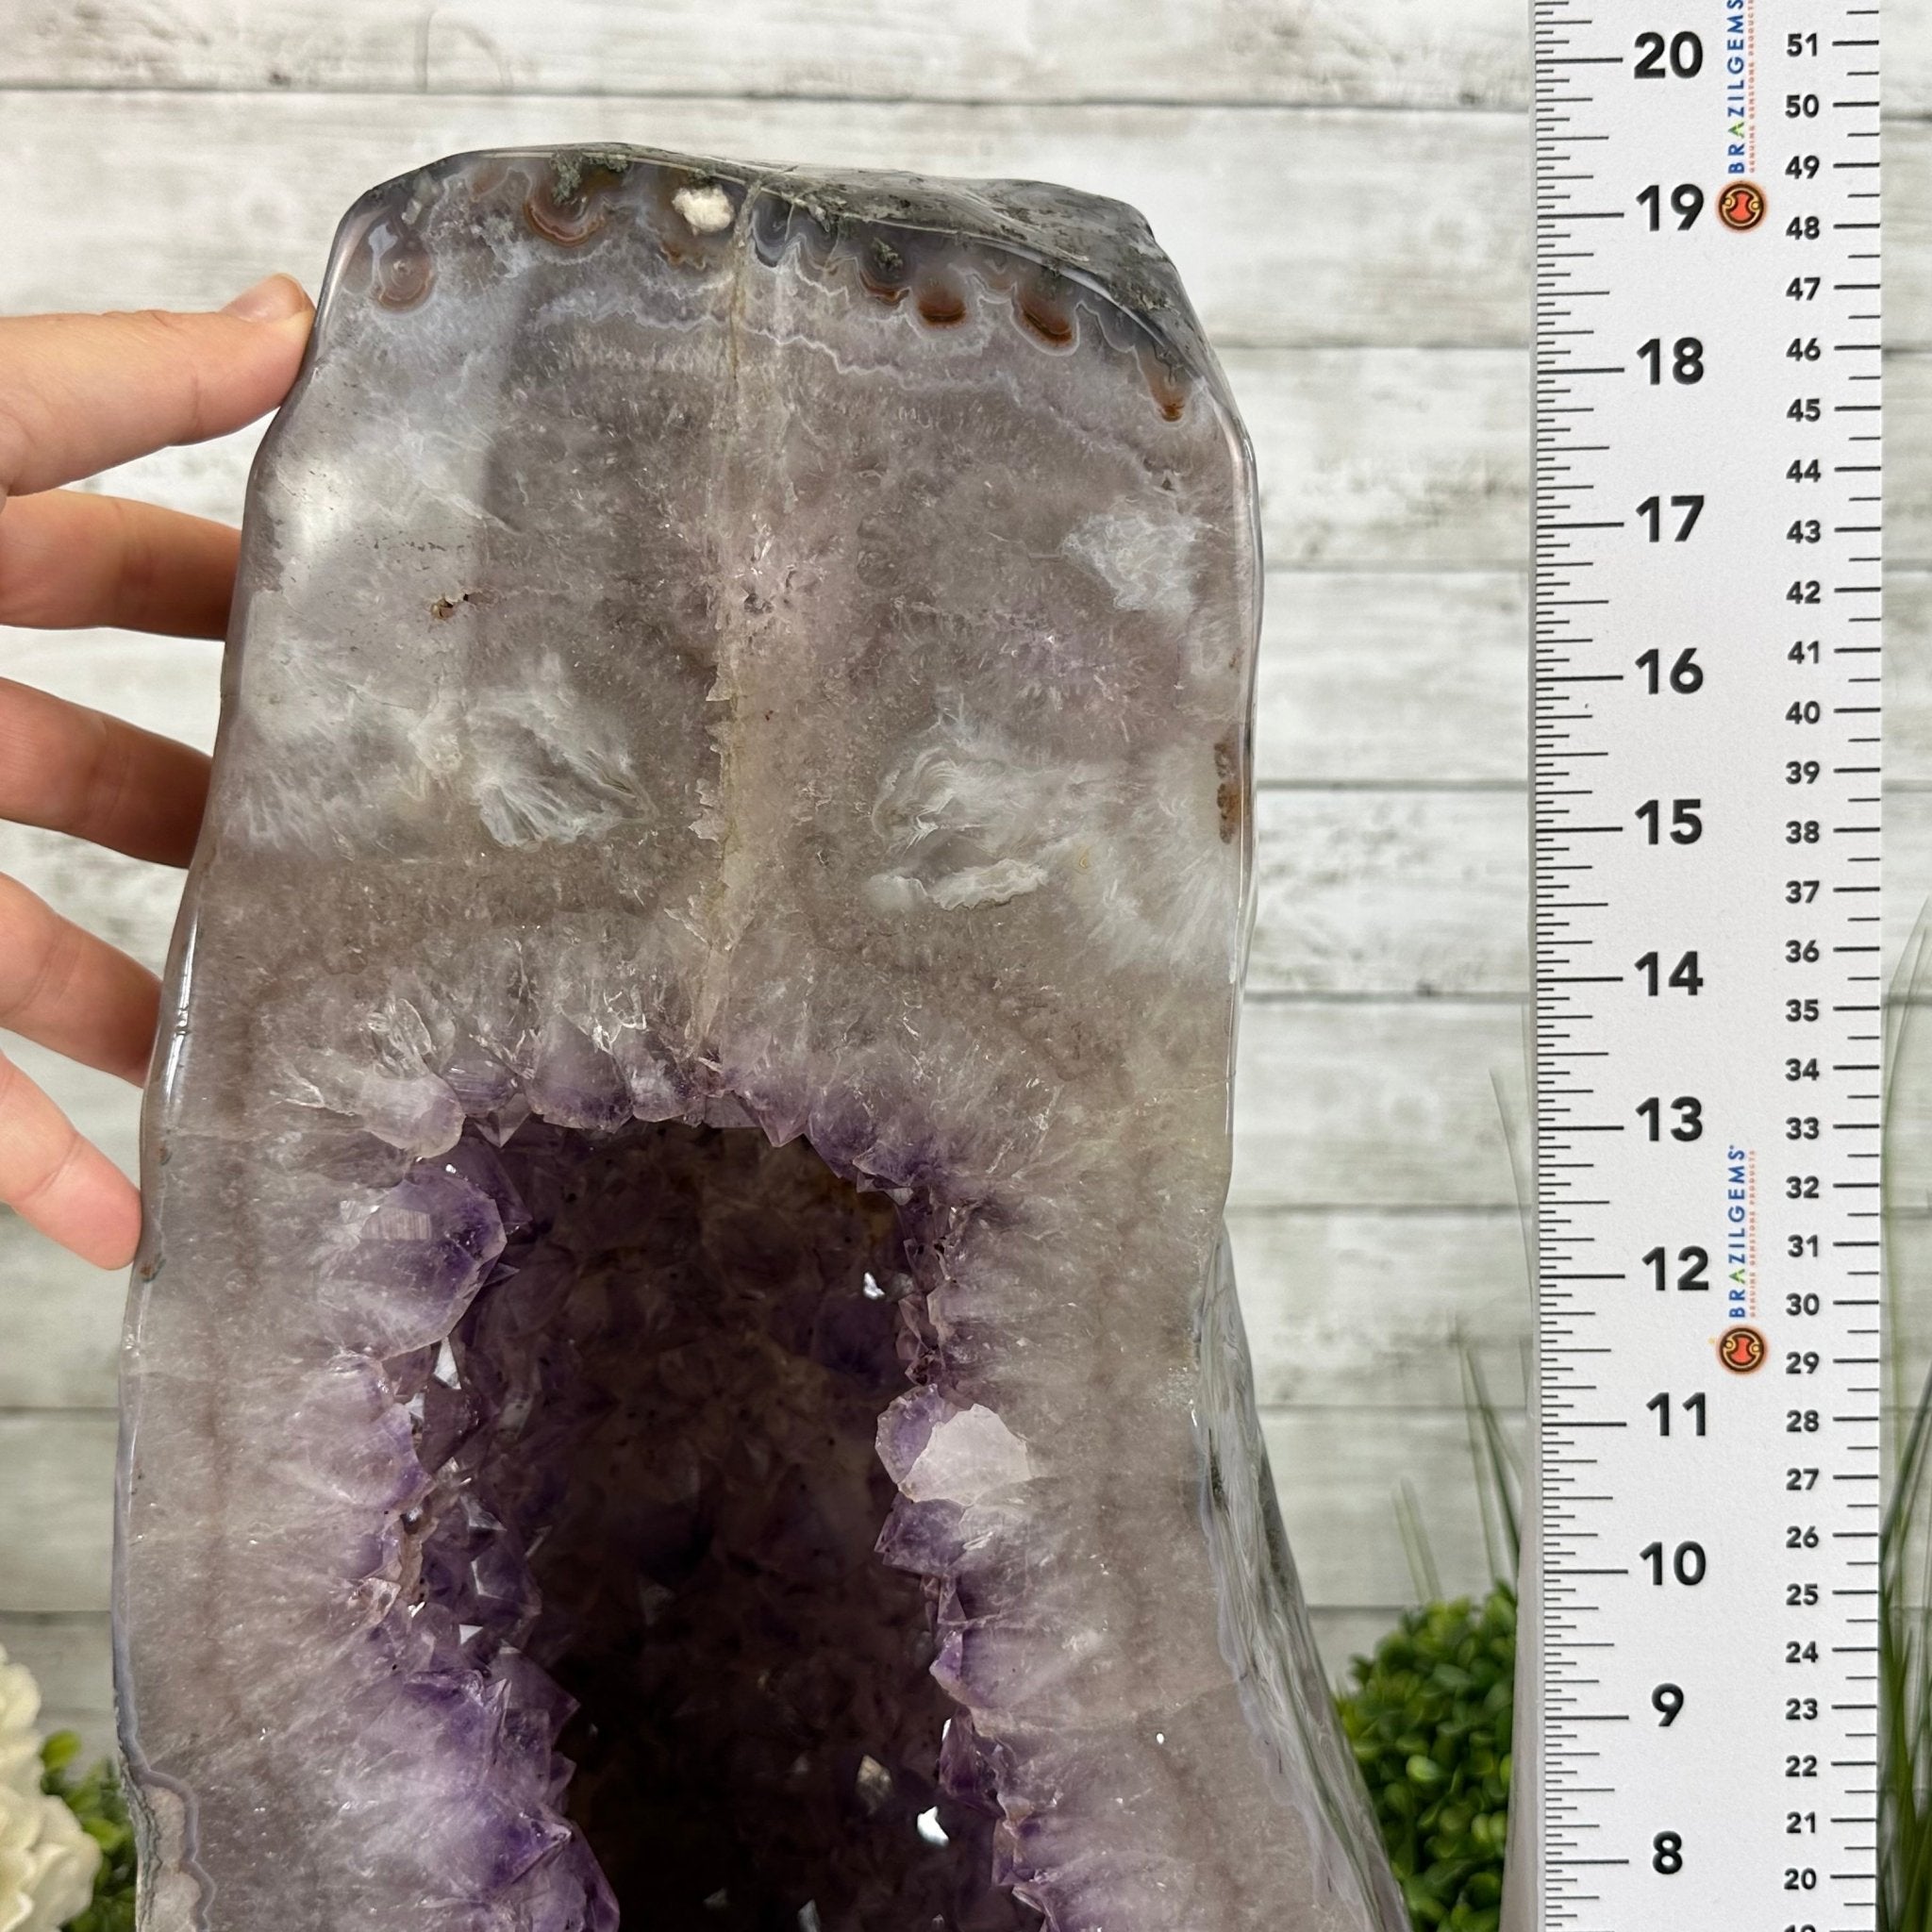 Standard Plus Quality Polished Brazilian Amethyst Cathedral, 67.5 lbs & 19.4" tall Model #5602-0163 by Brazil Gems - Brazil GemsBrazil GemsStandard Plus Quality Polished Brazilian Amethyst Cathedral, 67.5 lbs & 19.4" tall Model #5602-0163 by Brazil GemsPolished Cathedrals5602-0163